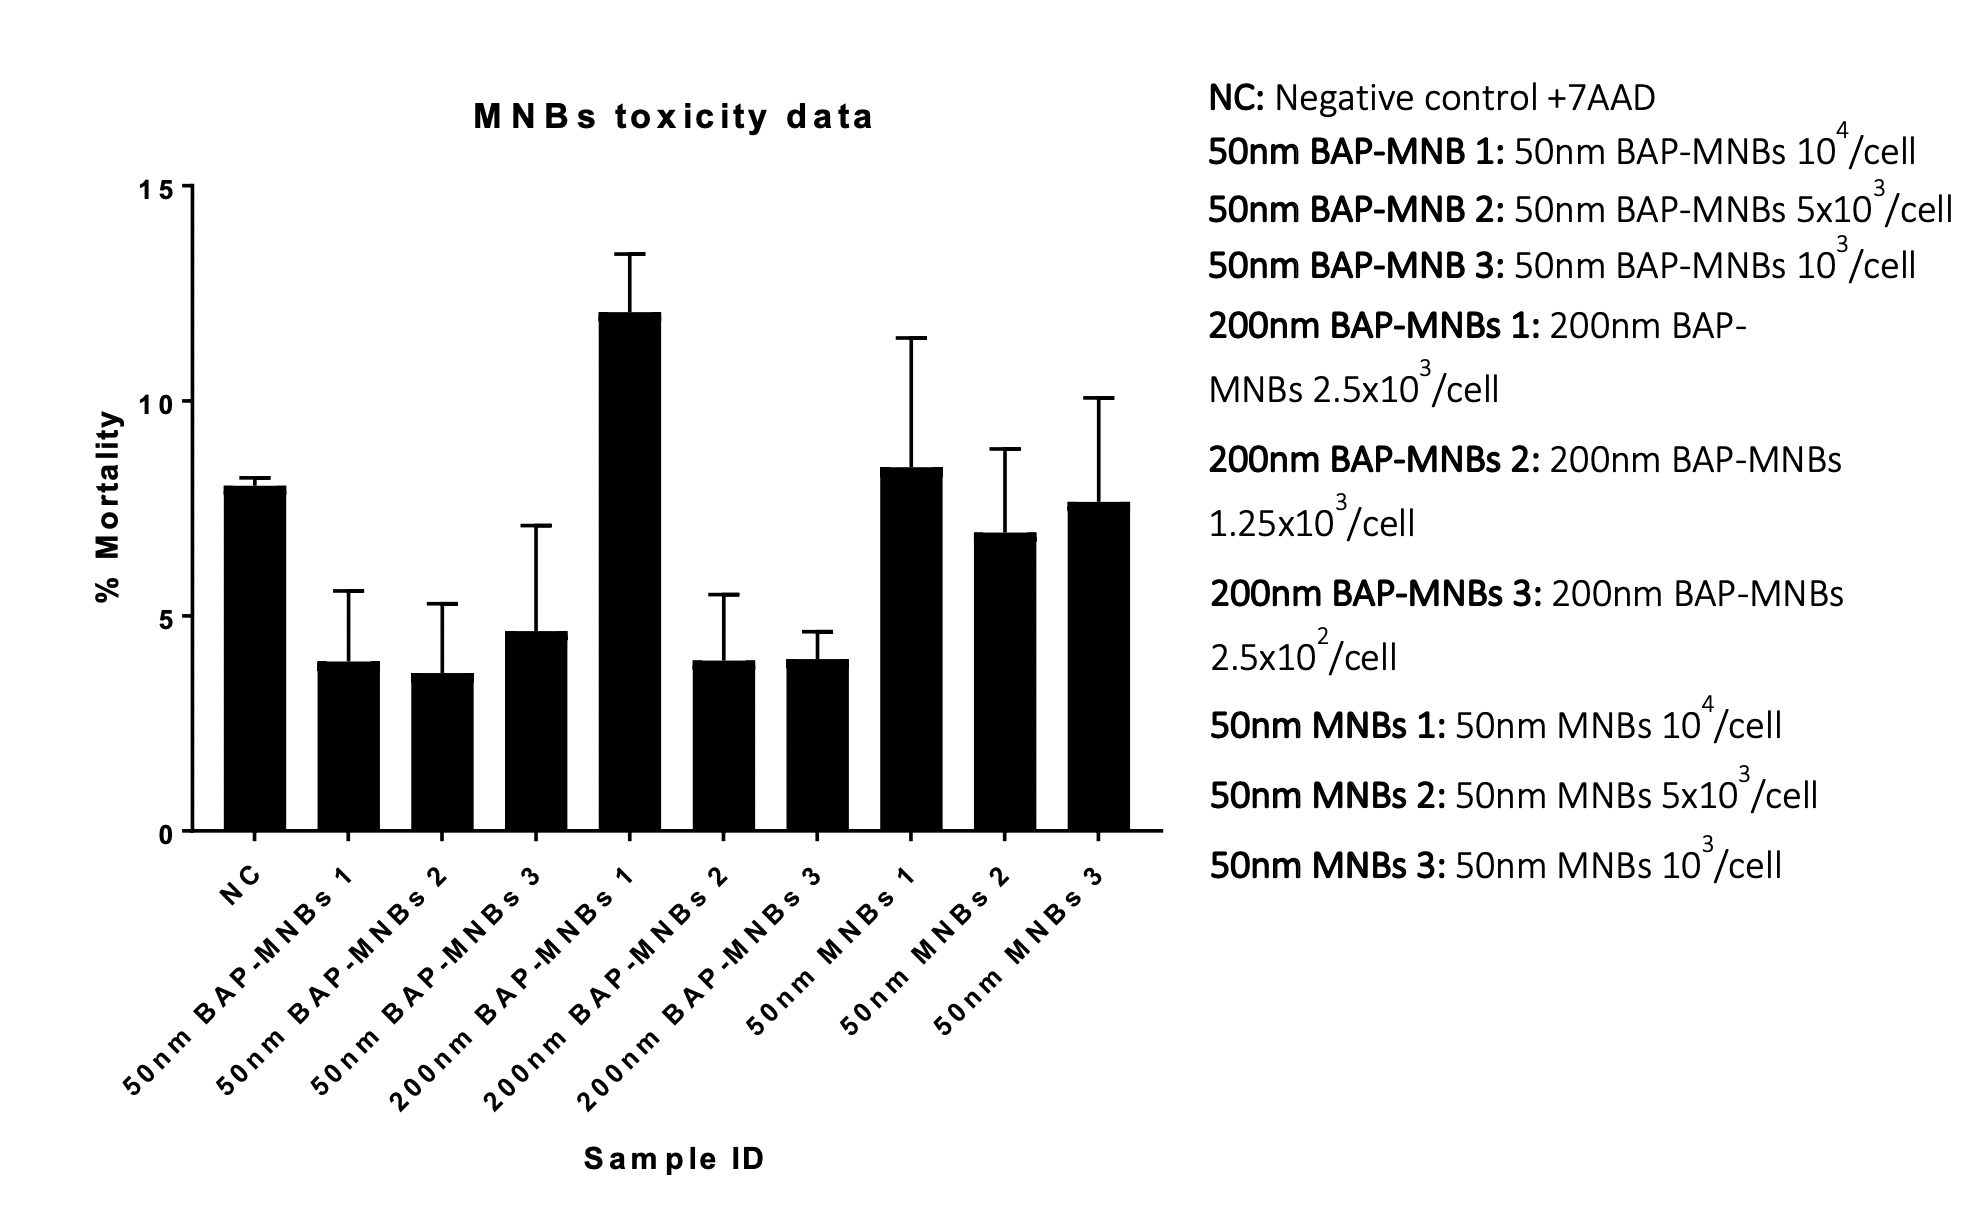 MNBs toxicity data